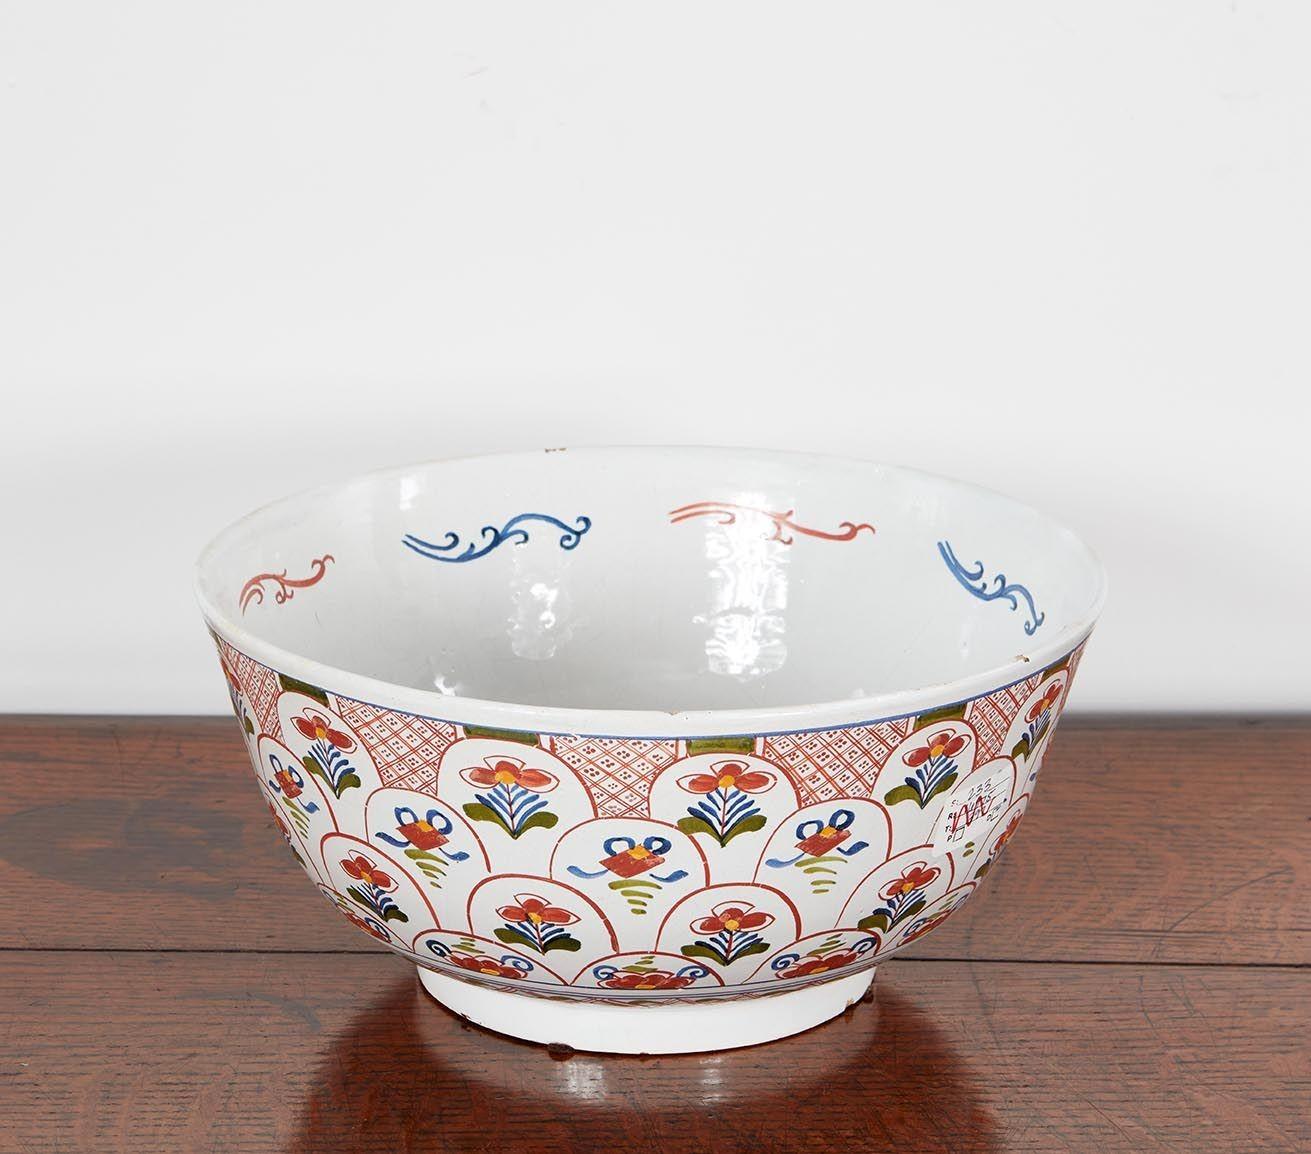 18th c. English Delft Polychrome Punch Bowl In Good Condition For Sale In Greenwich, CT